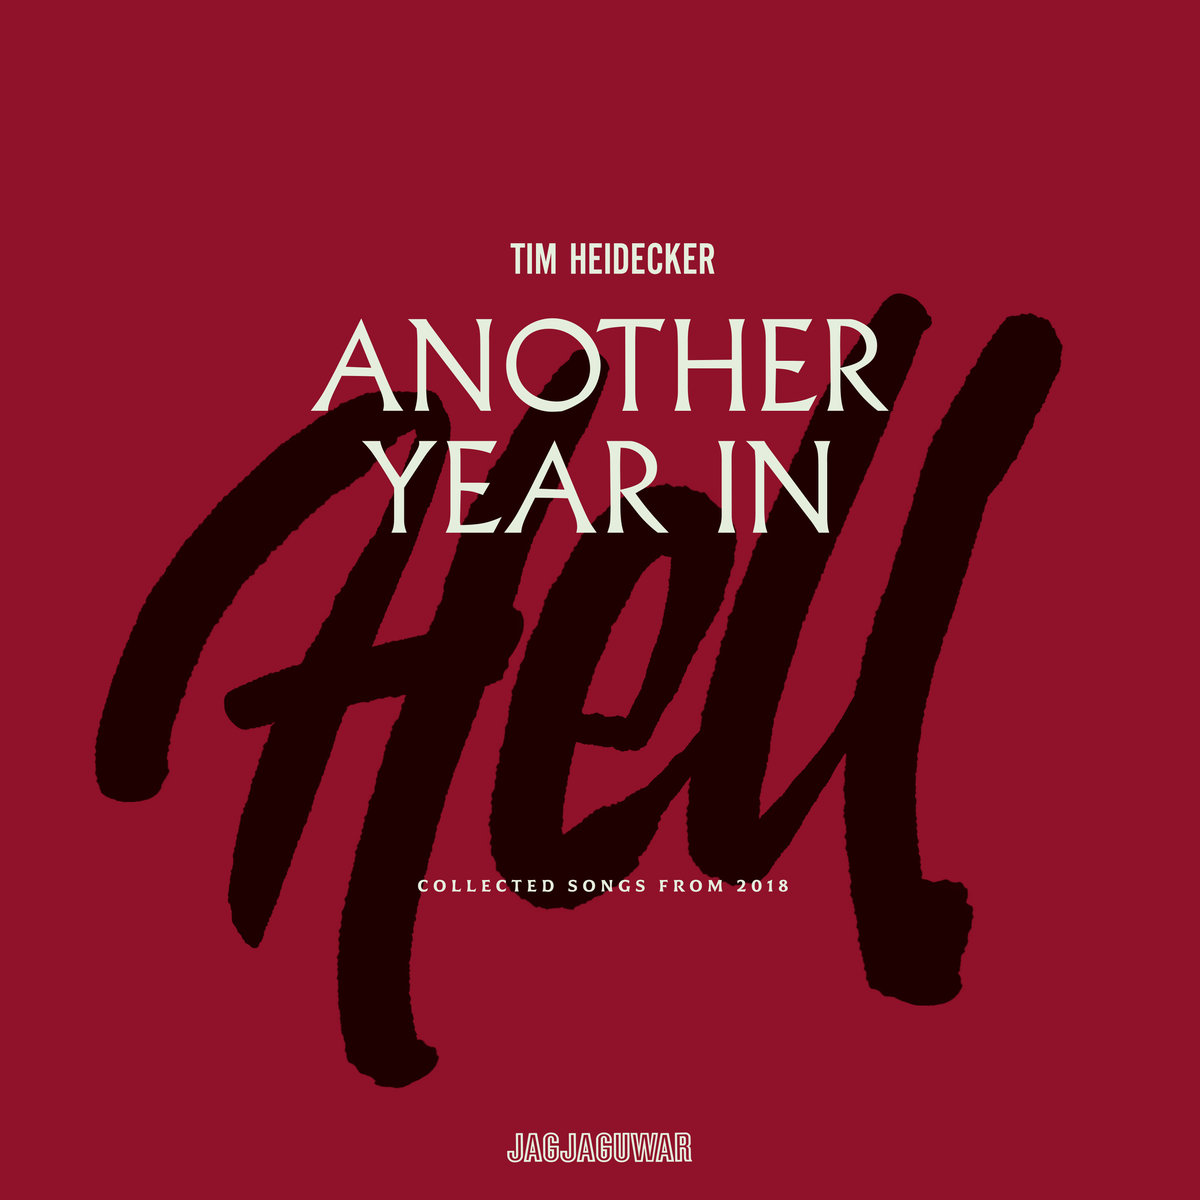 TIM HEIDECKER - ANOTHER YEAR IN HELL: COLLECTED SONGS FROM 2018 album artwork